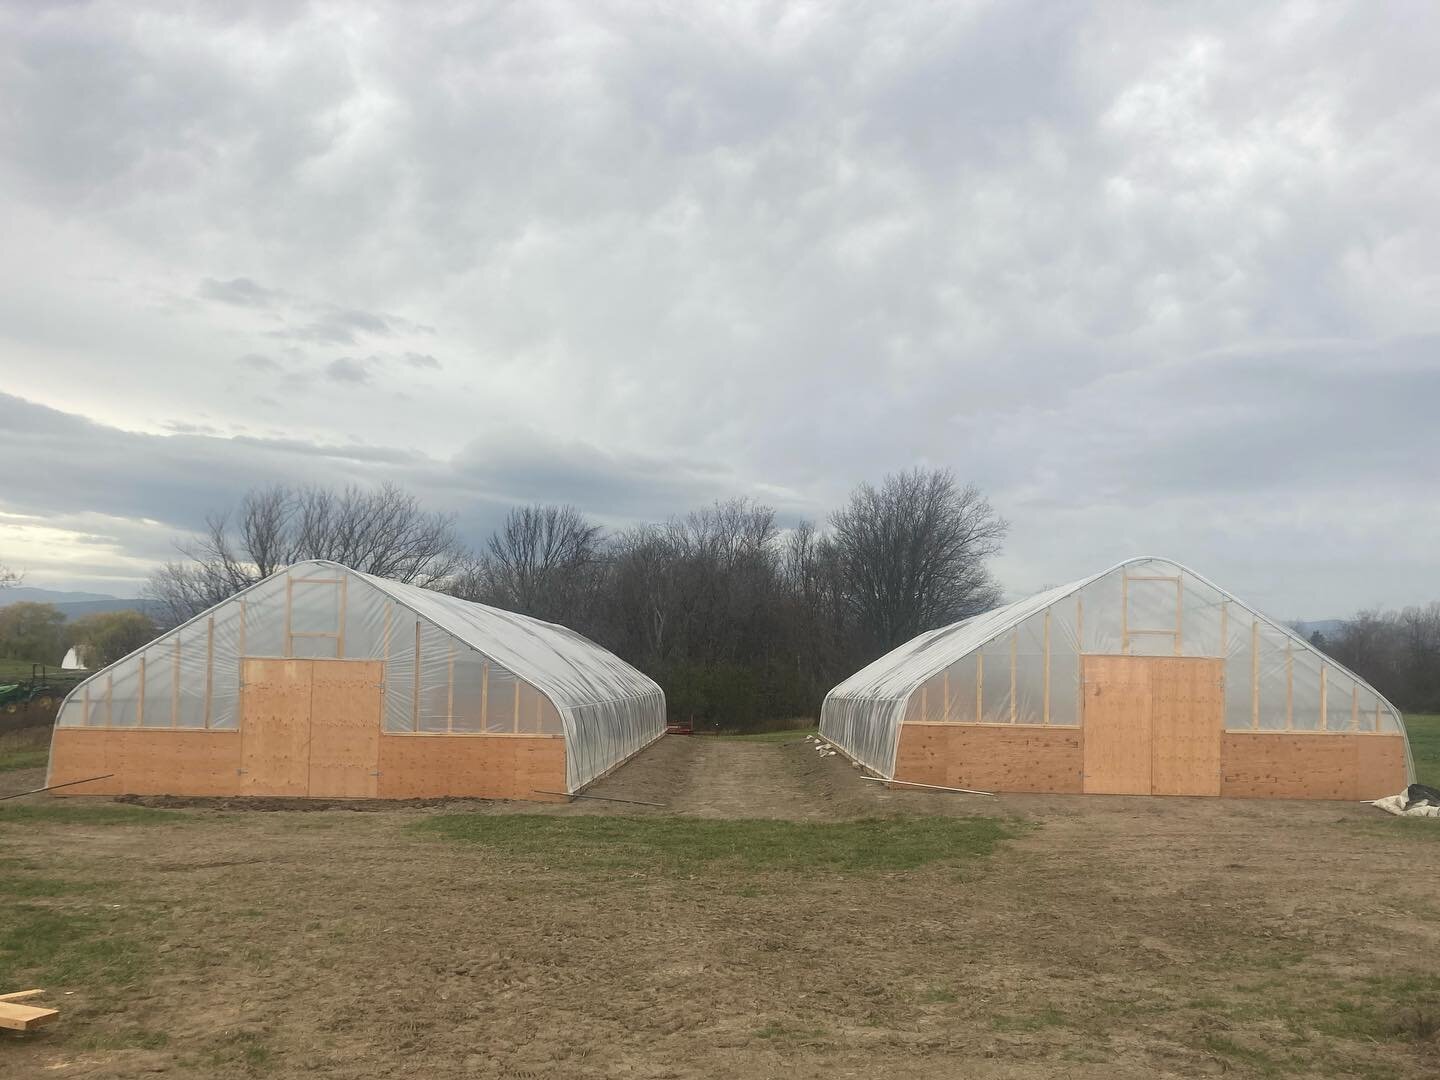 And that&rsquo;s a wrap!!! @headoverfieldsvermont #greenhouseconstruction #hightunnel #greenhouse #instantfarm #vineripegh